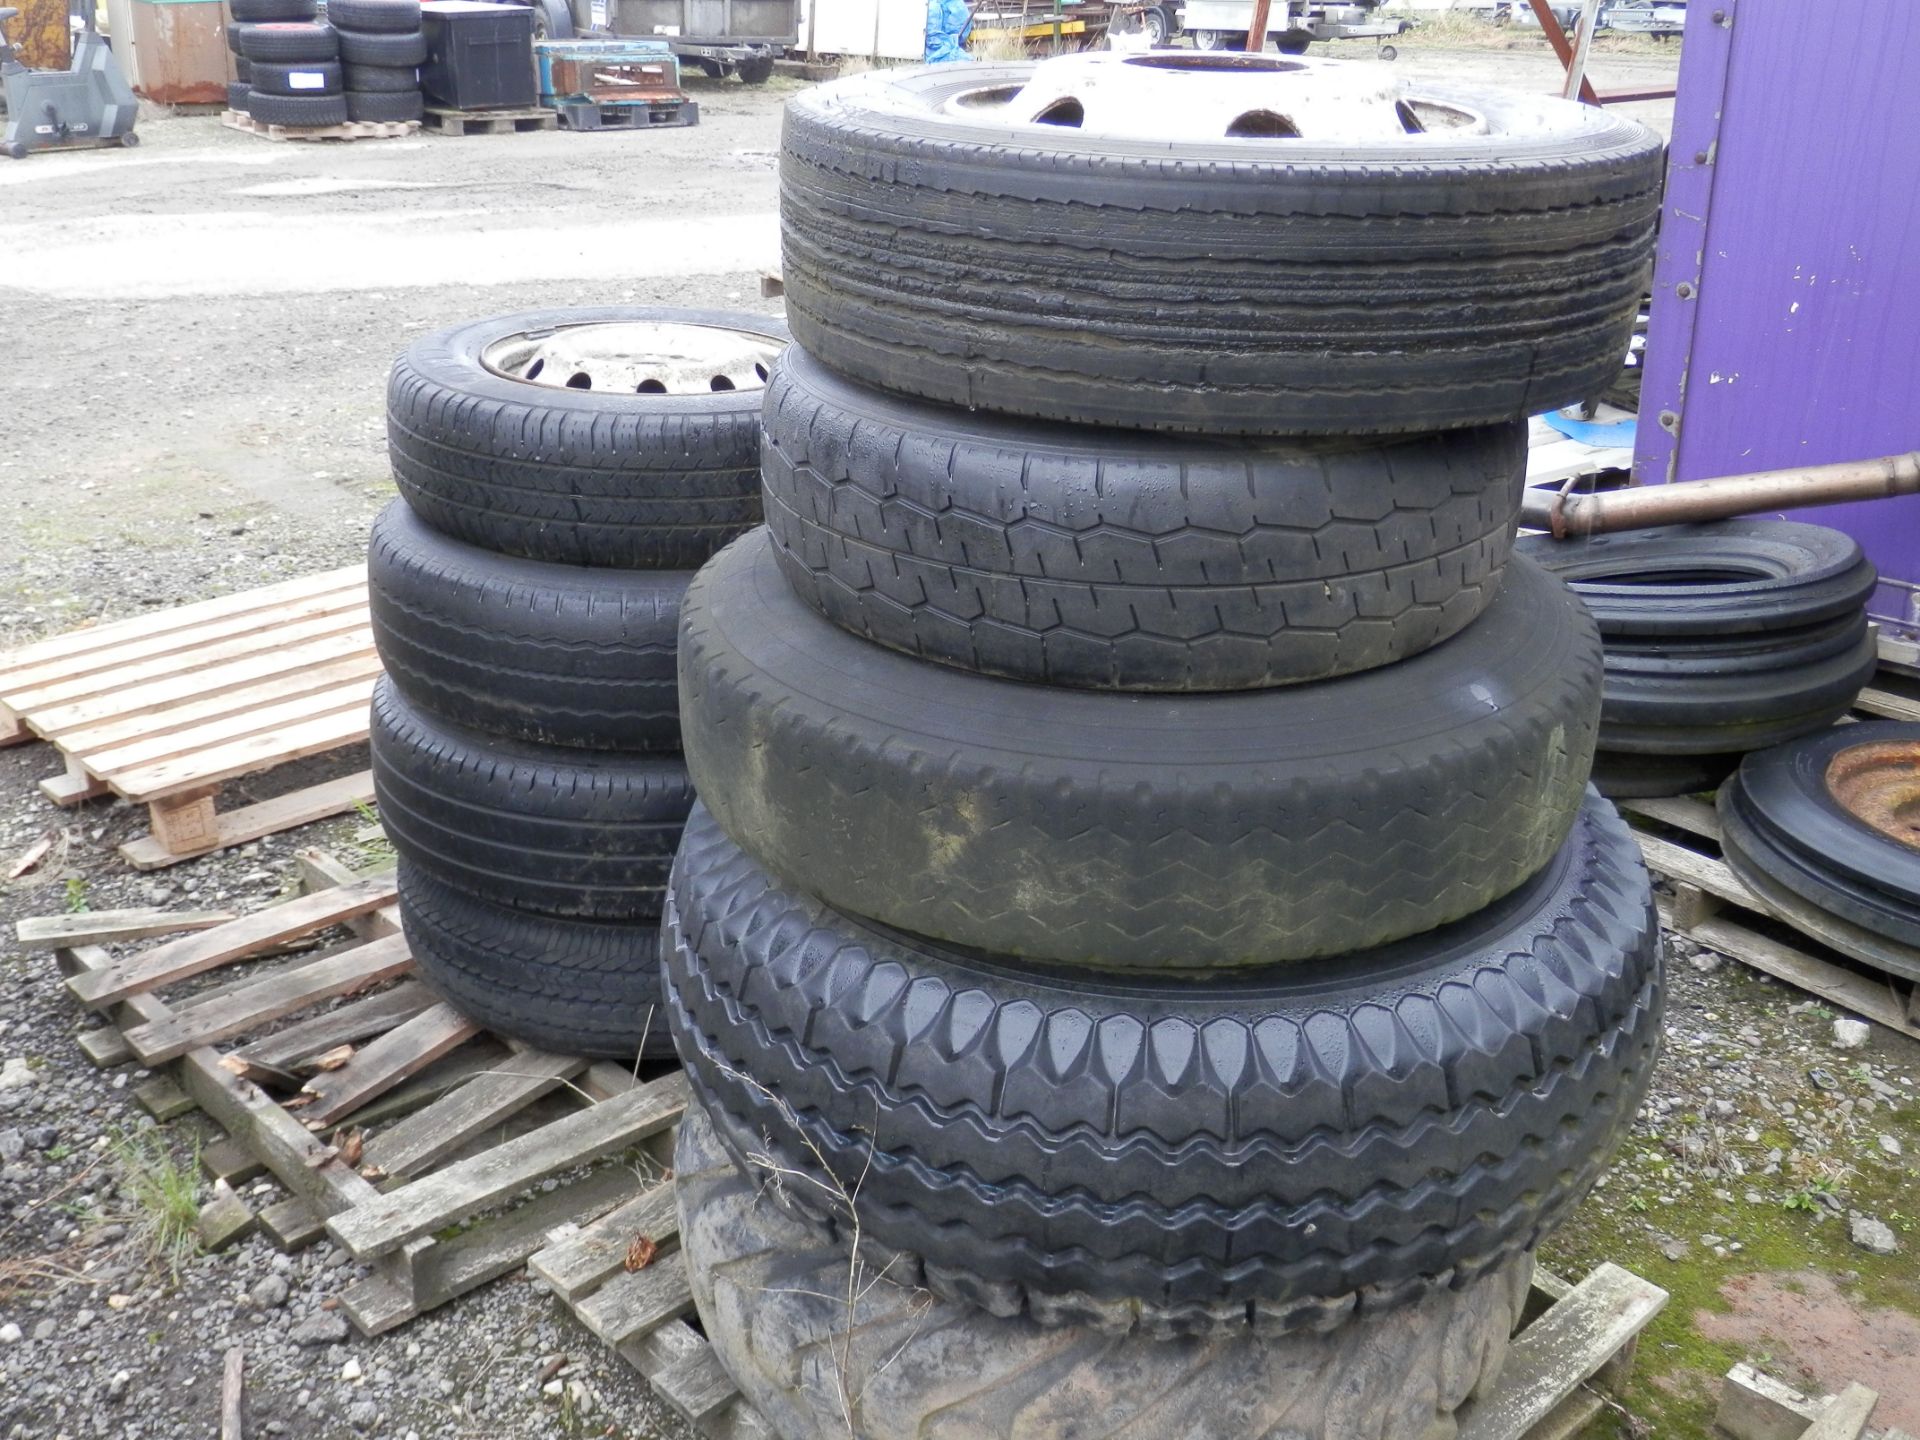 85 + ASSORTED LORRY, CAR & TRAILER TYRES & WHEELS, AS PICTURED. BUYER TO COLLECT COMPLETE JOBLOT. - Image 10 of 10